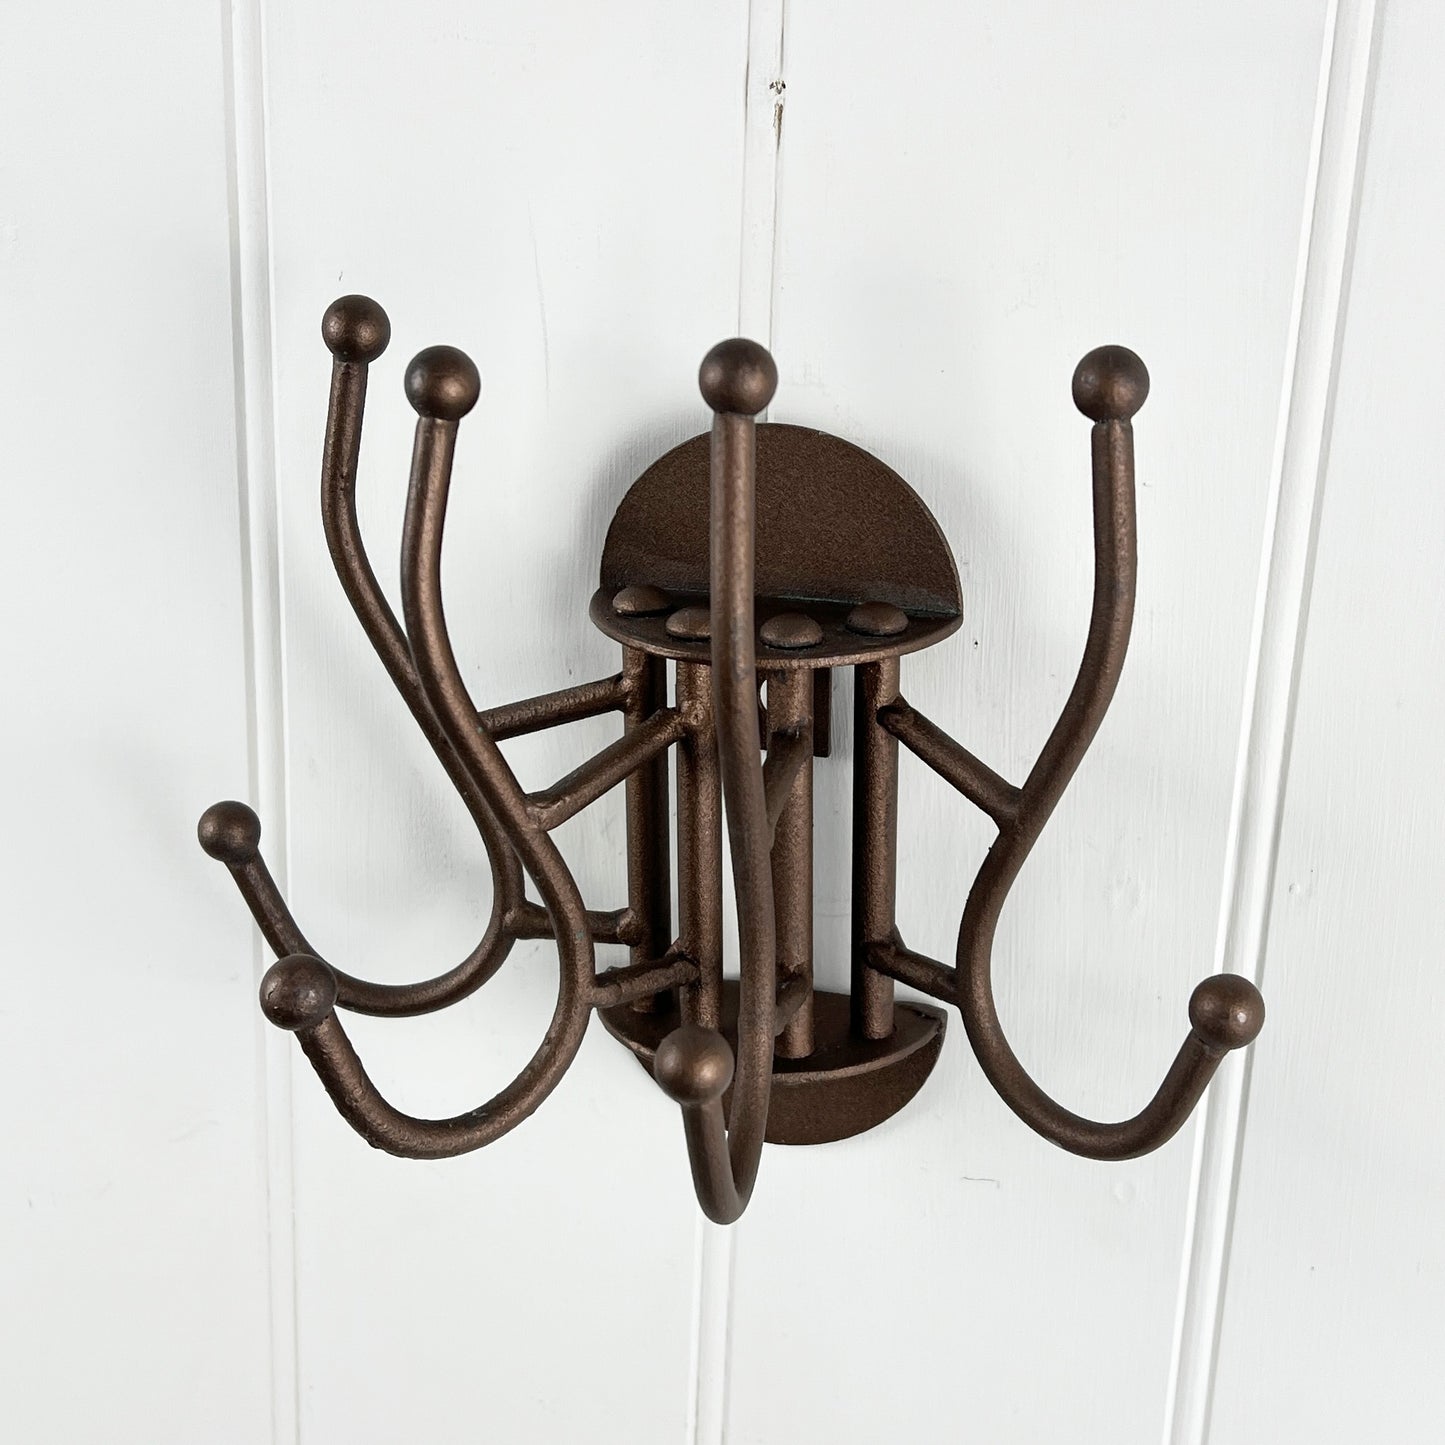 4 Hook Wall Mounted Coat Stand – Metal